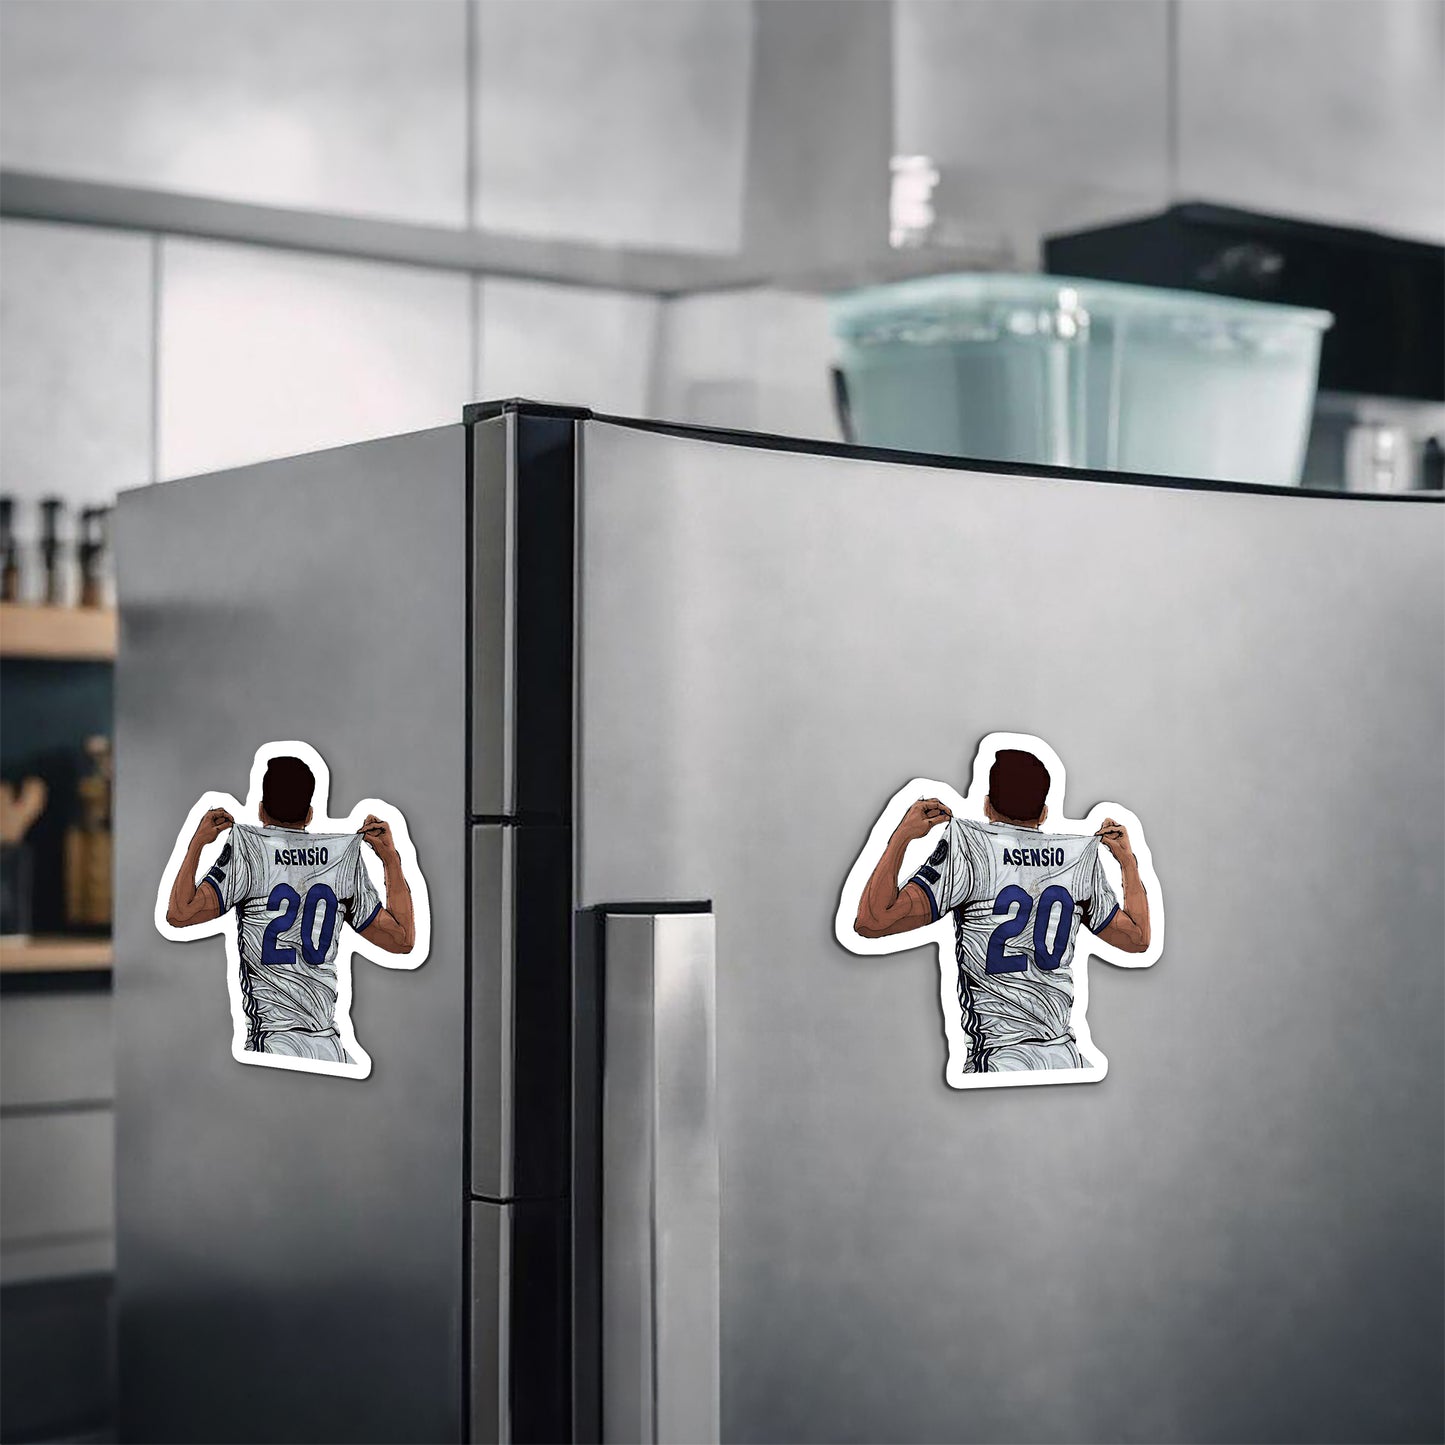 Asensio Real Madrid Magnetic Sticker